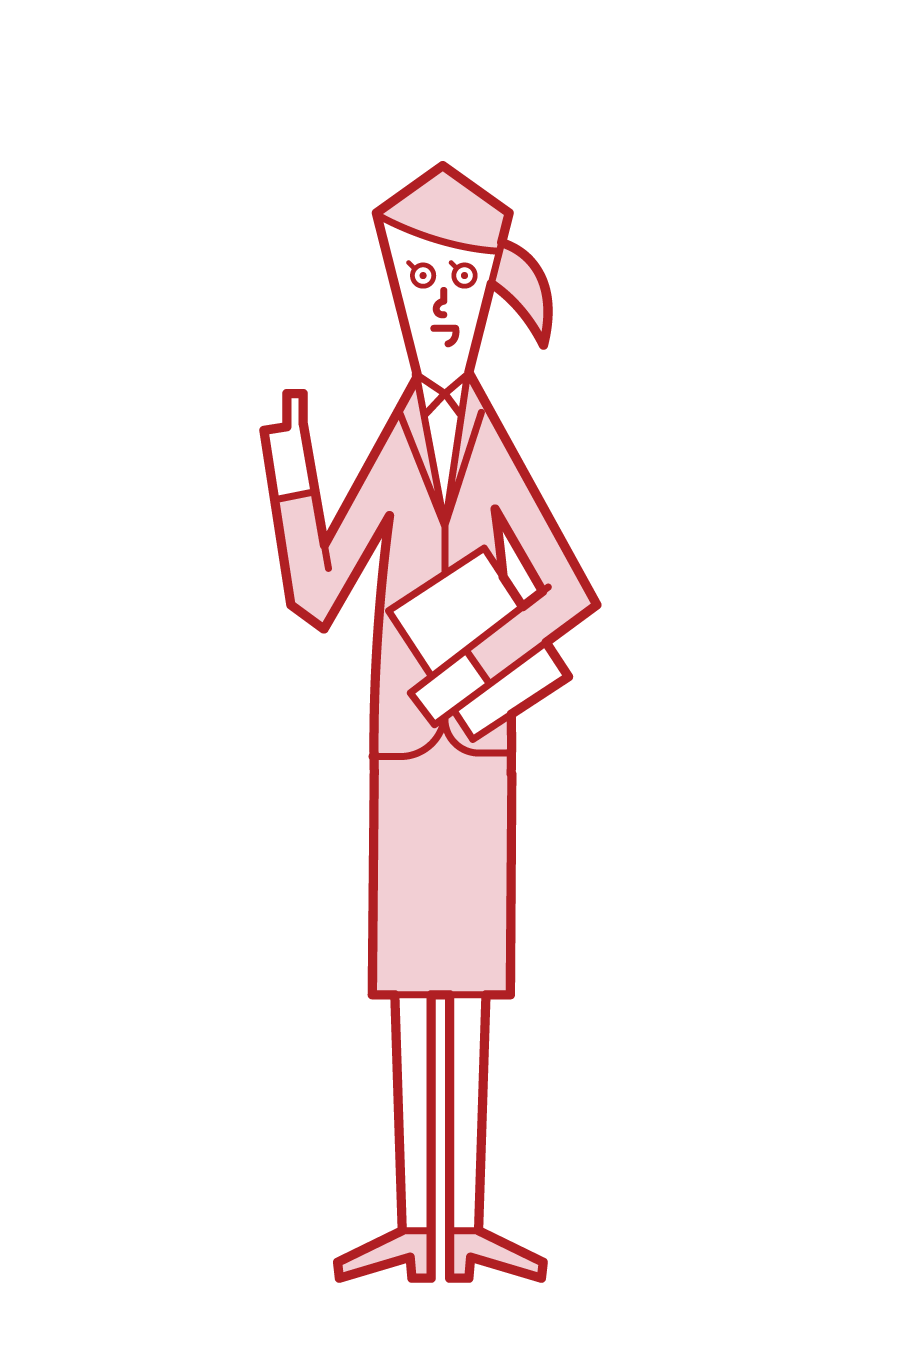 Illustration of a woman who speaks